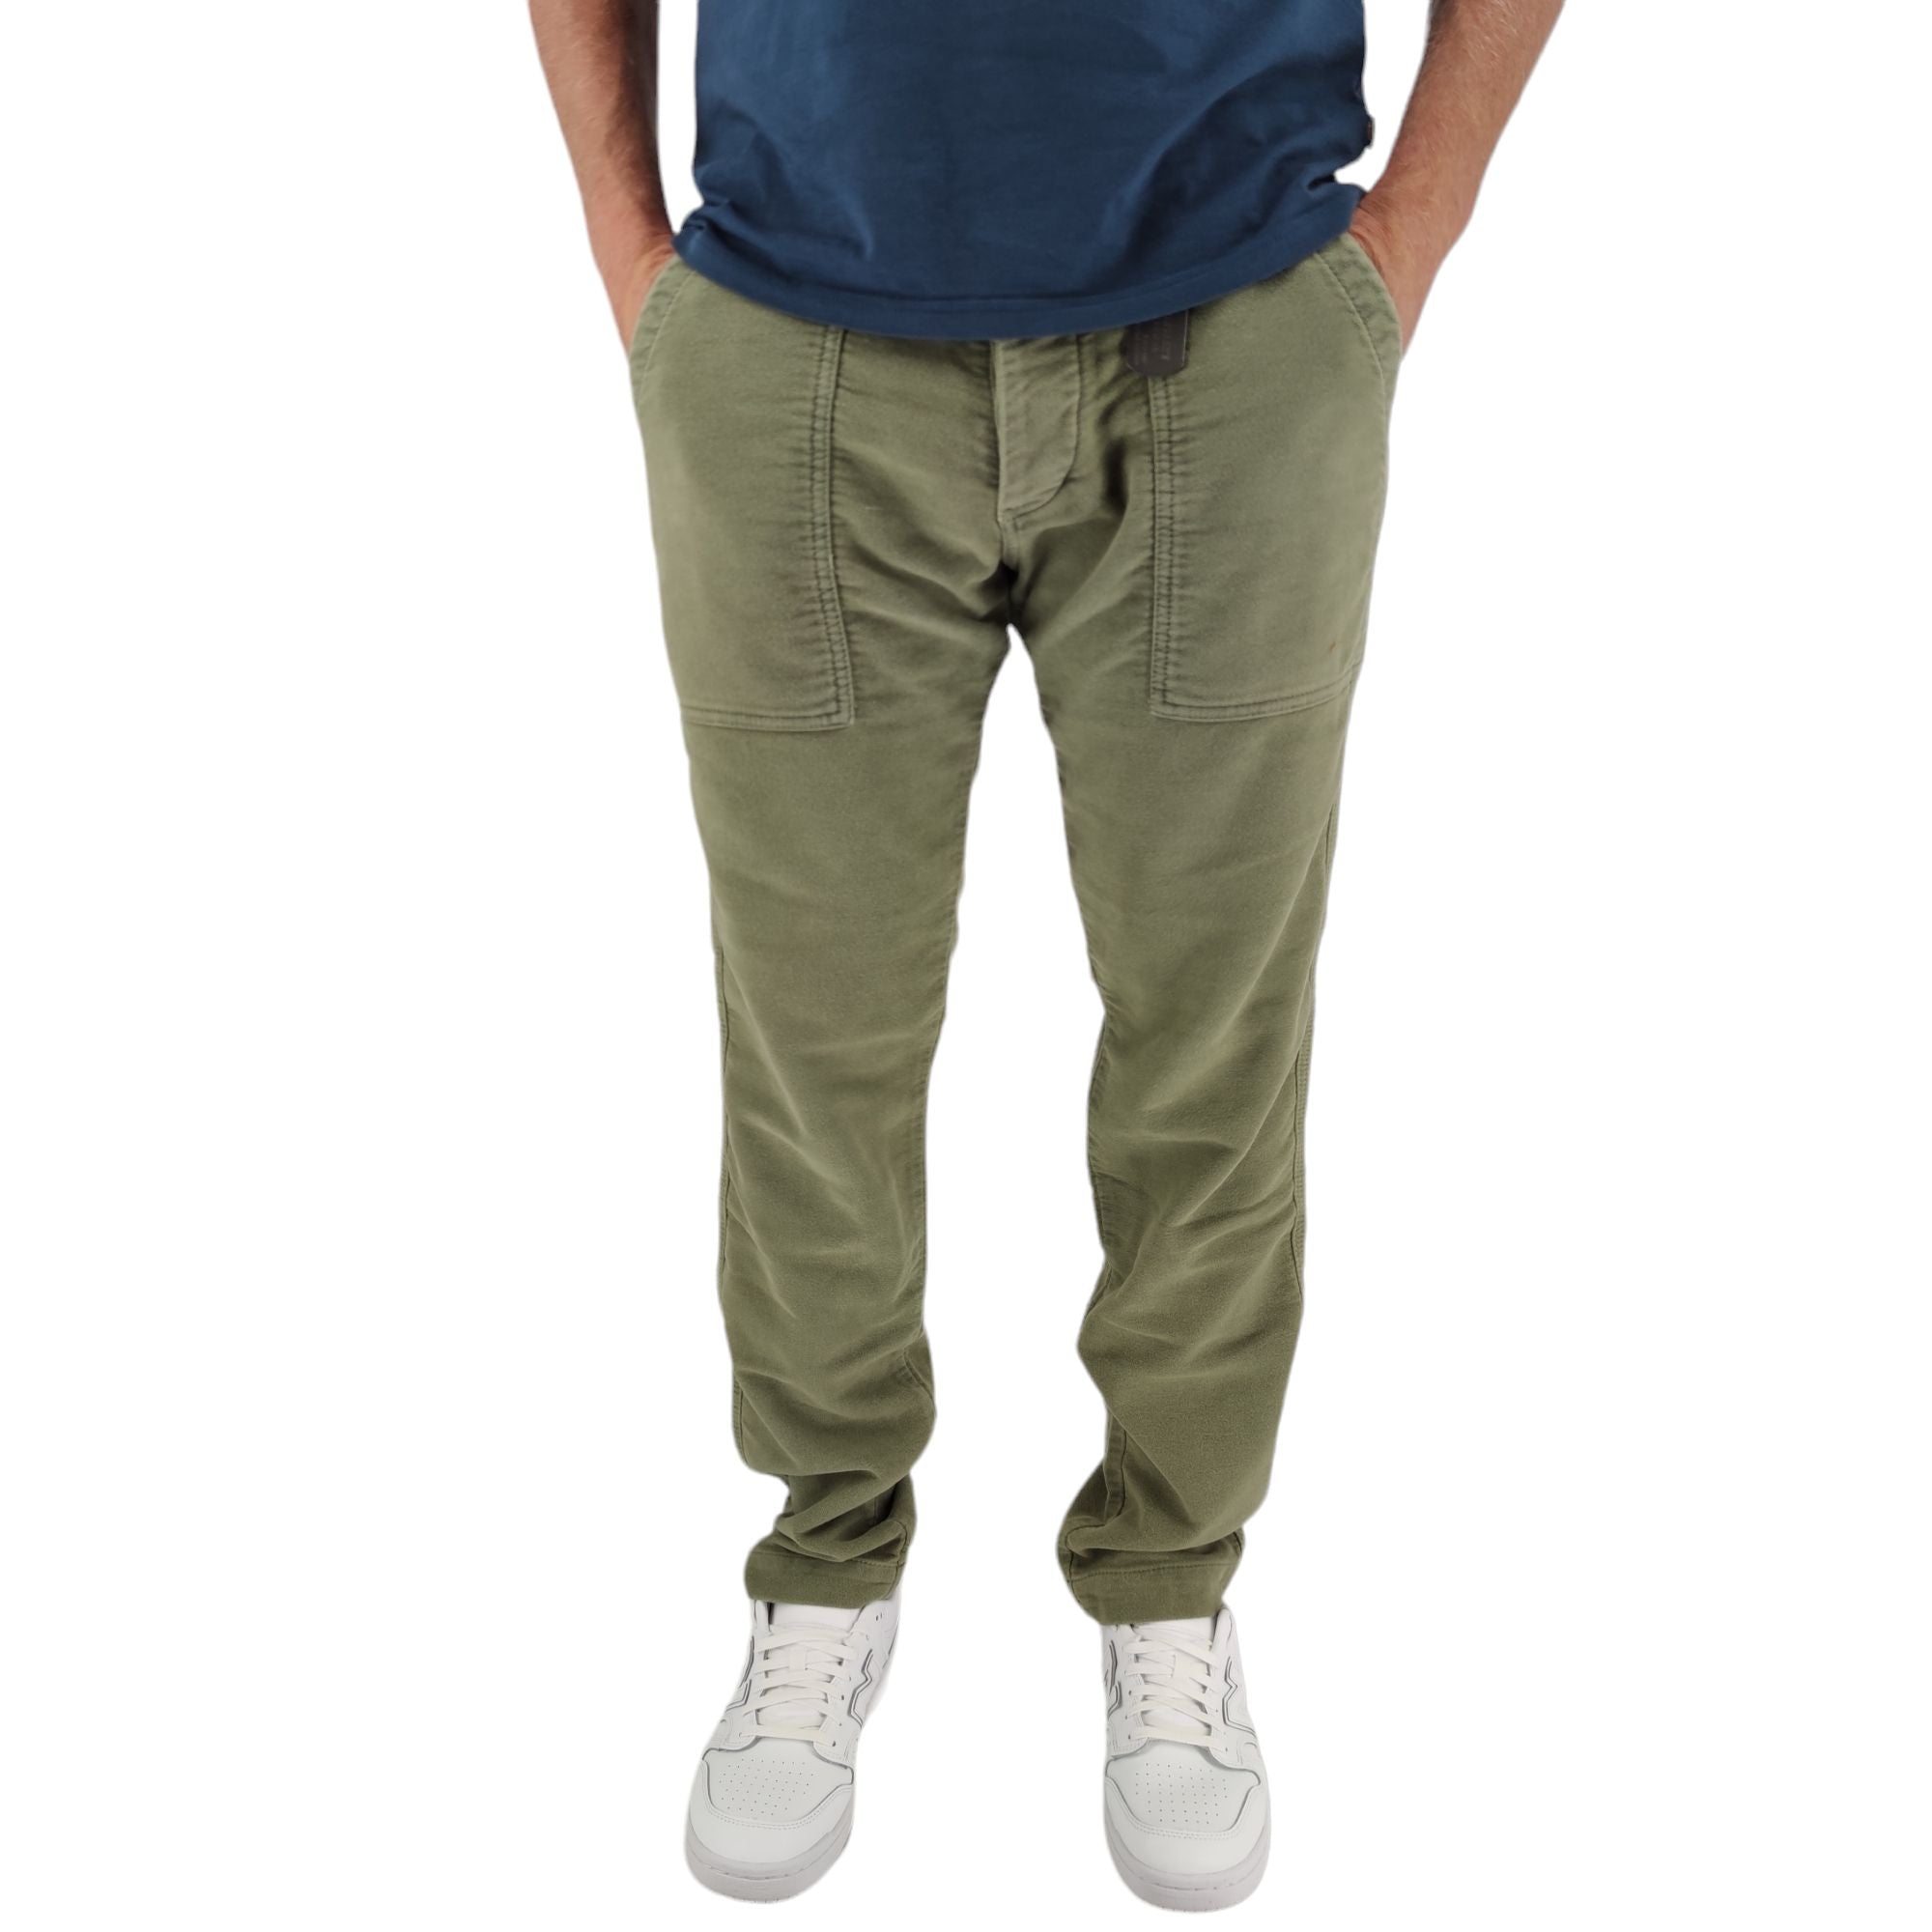 Men's Fatigue Degrasse Trousers Military Green 